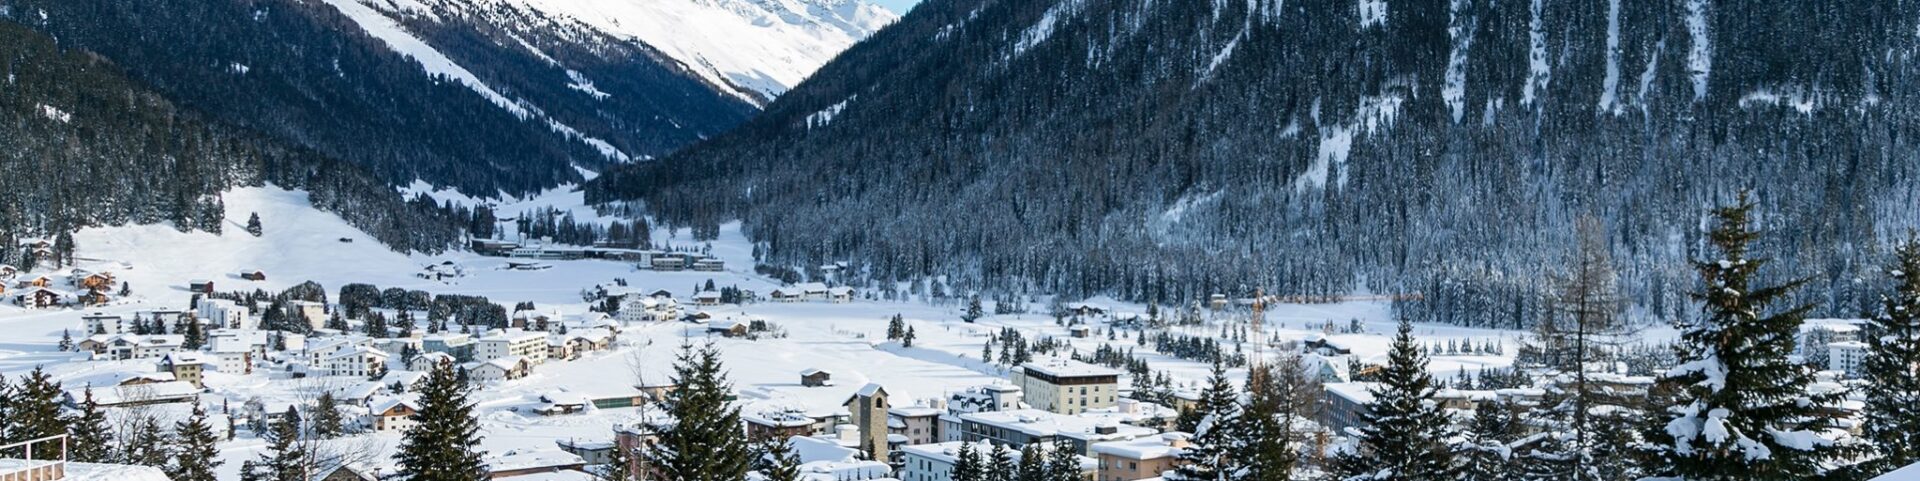 A scenic, snowy image of Davos, Switzerland.